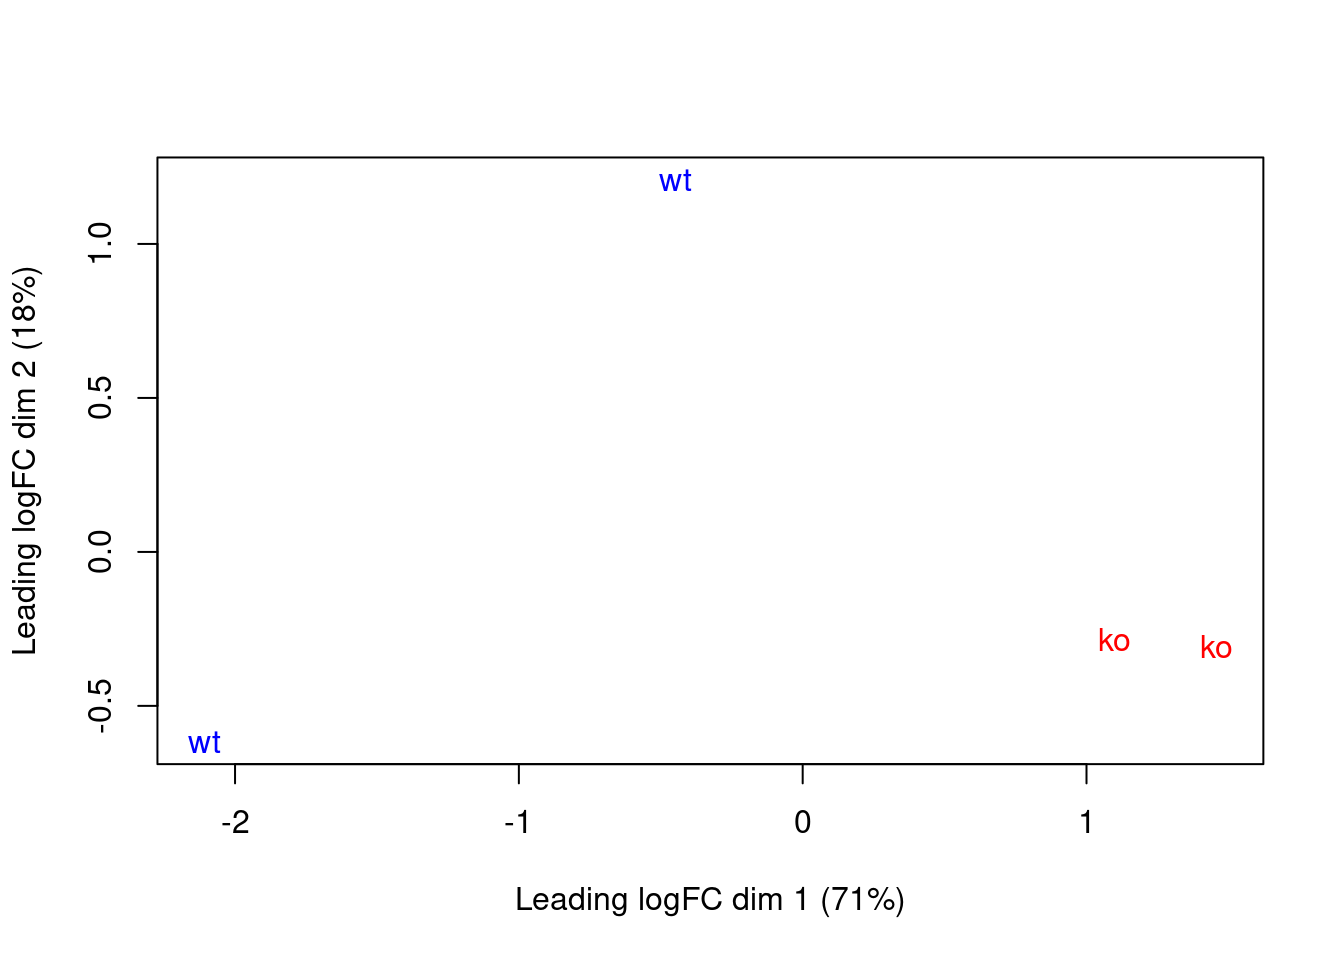 MDS plot with two dimensions for all samples in the CBP dataset. Samples are labelled and coloured according to the genotype. A larger top set of windows was used to improve the visualization of the genome-wide differences between the WT samples.